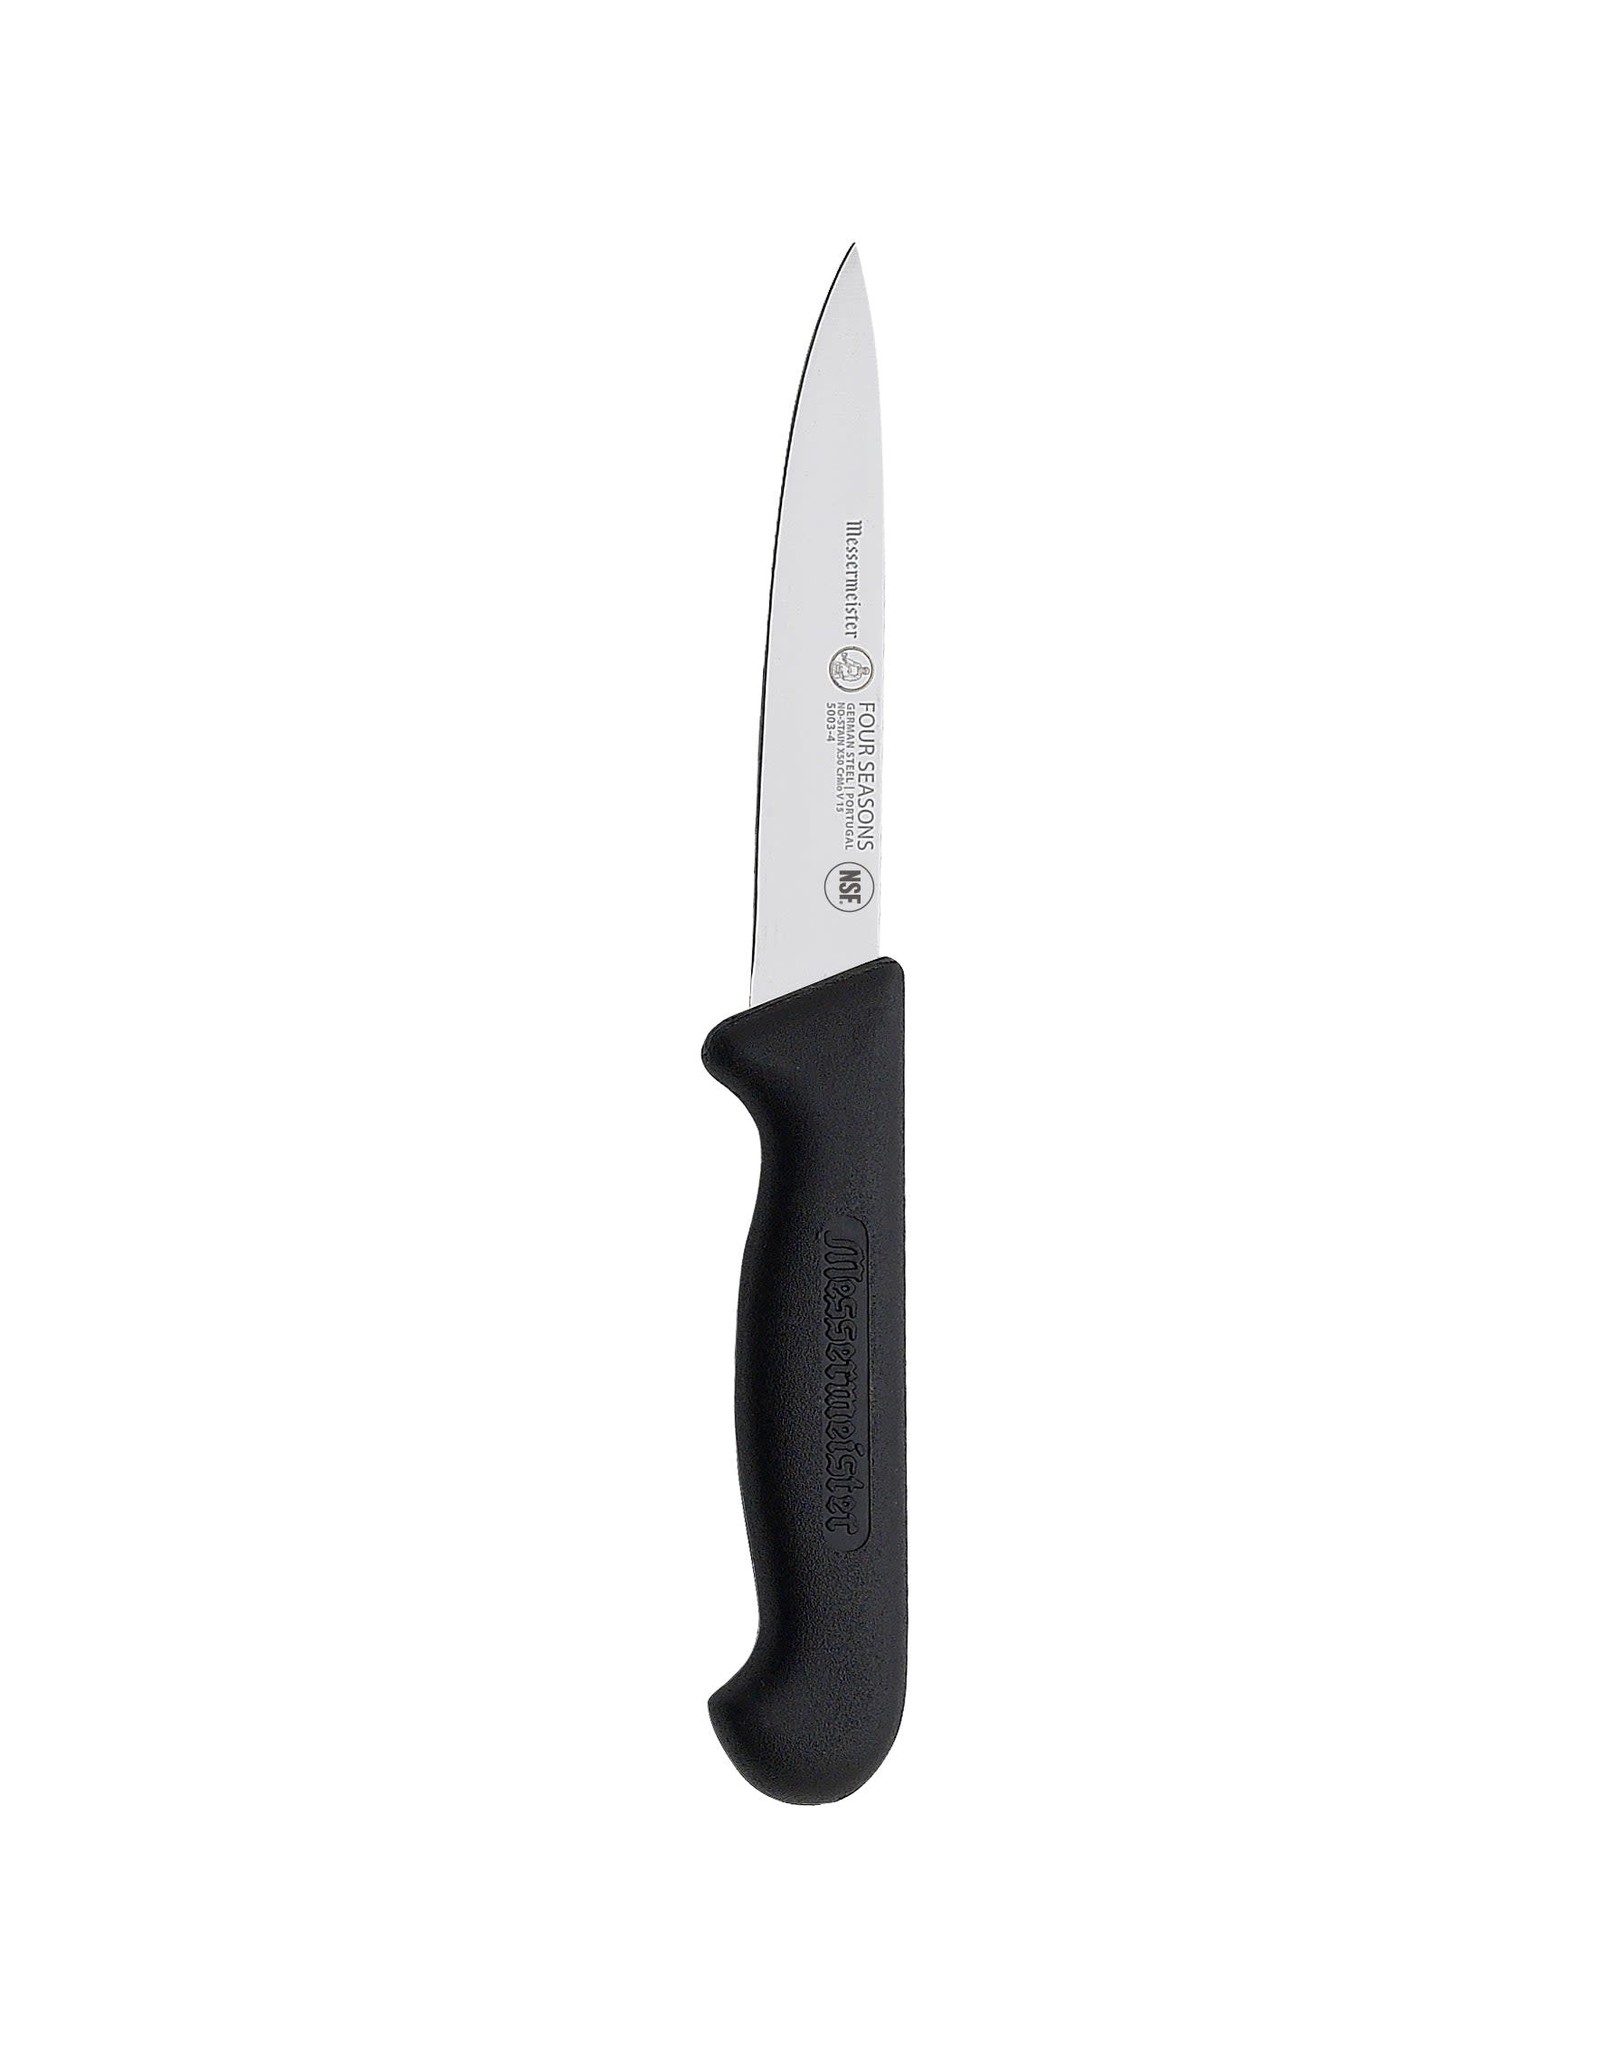 Messermeister Pro Series 4 Spear Point Paring Knife